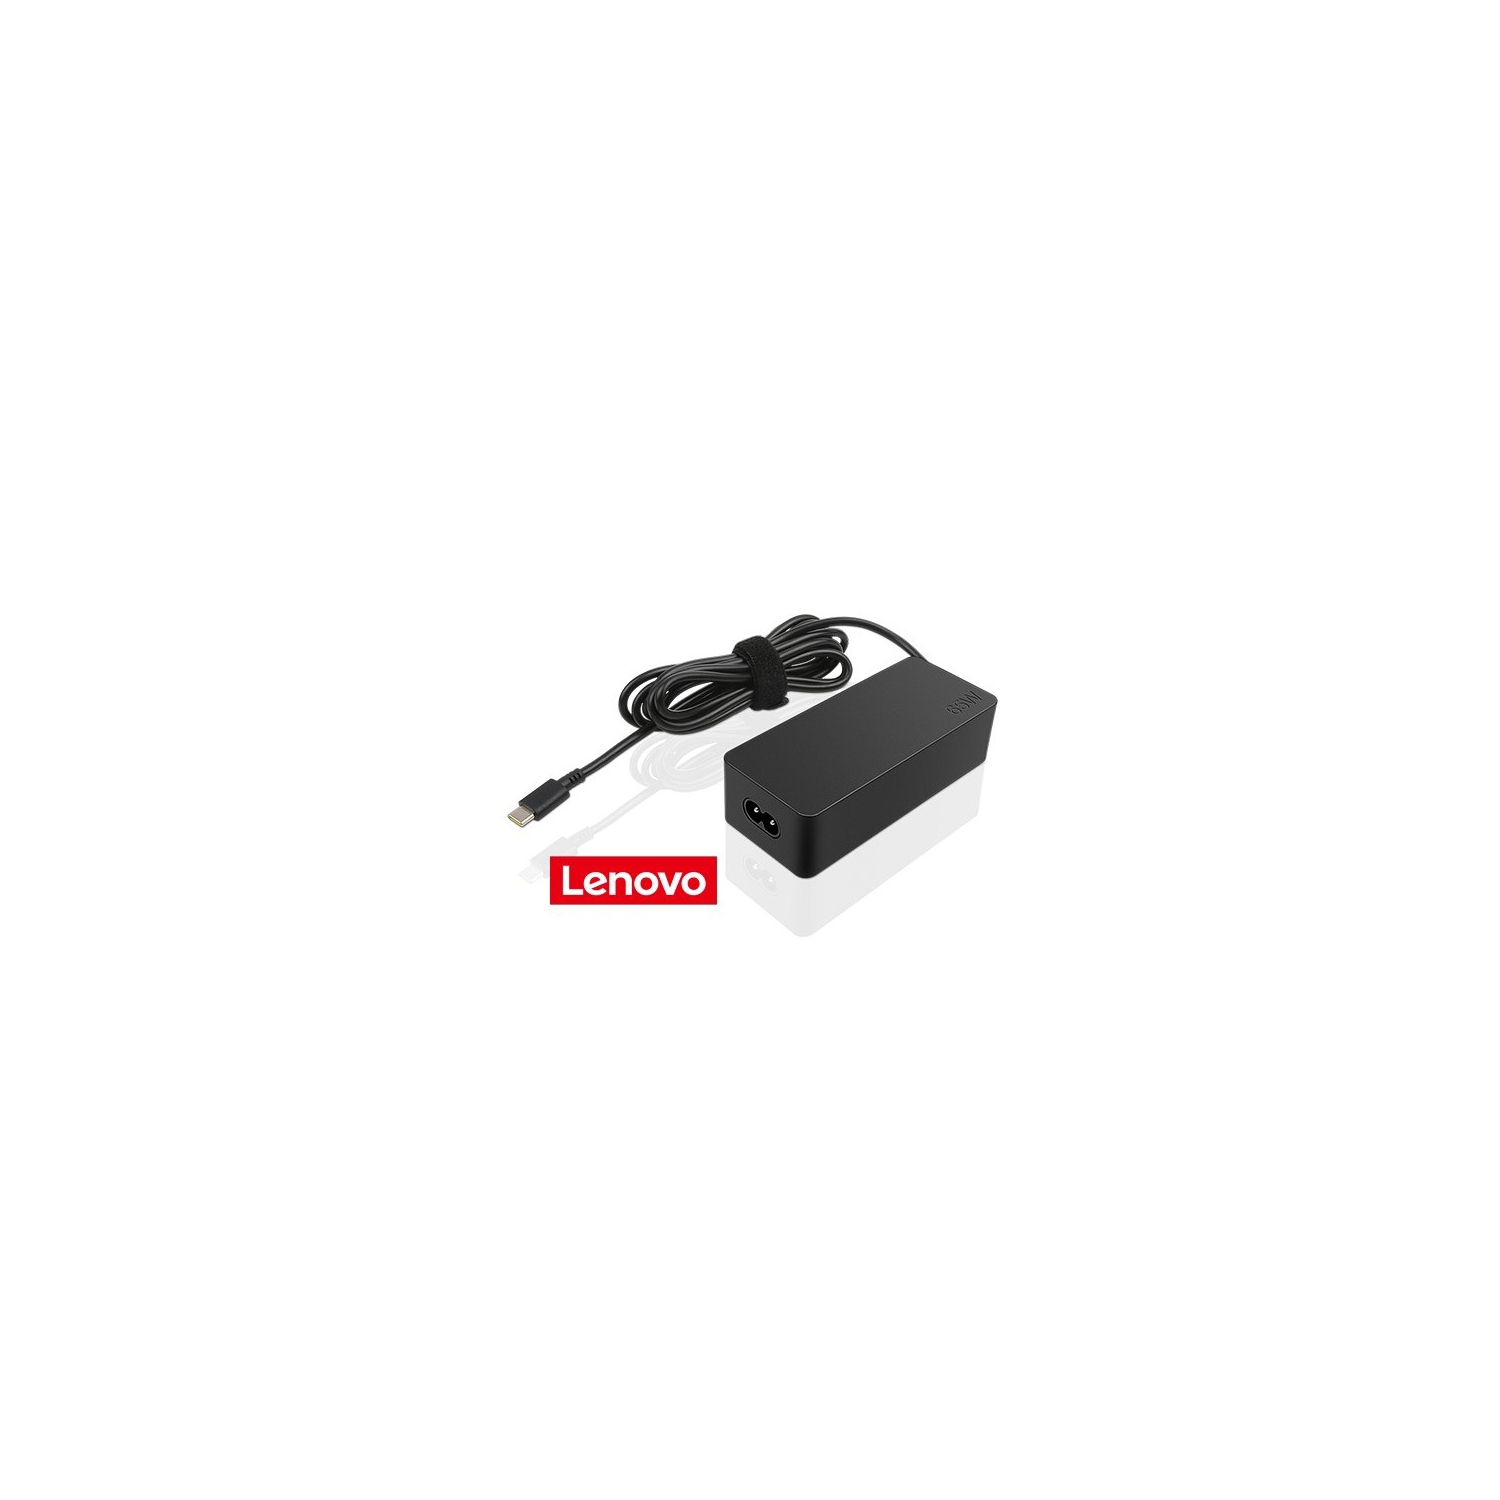 Lenovo 65w USB Type-C AC Adapter (AC Power Cord Included)